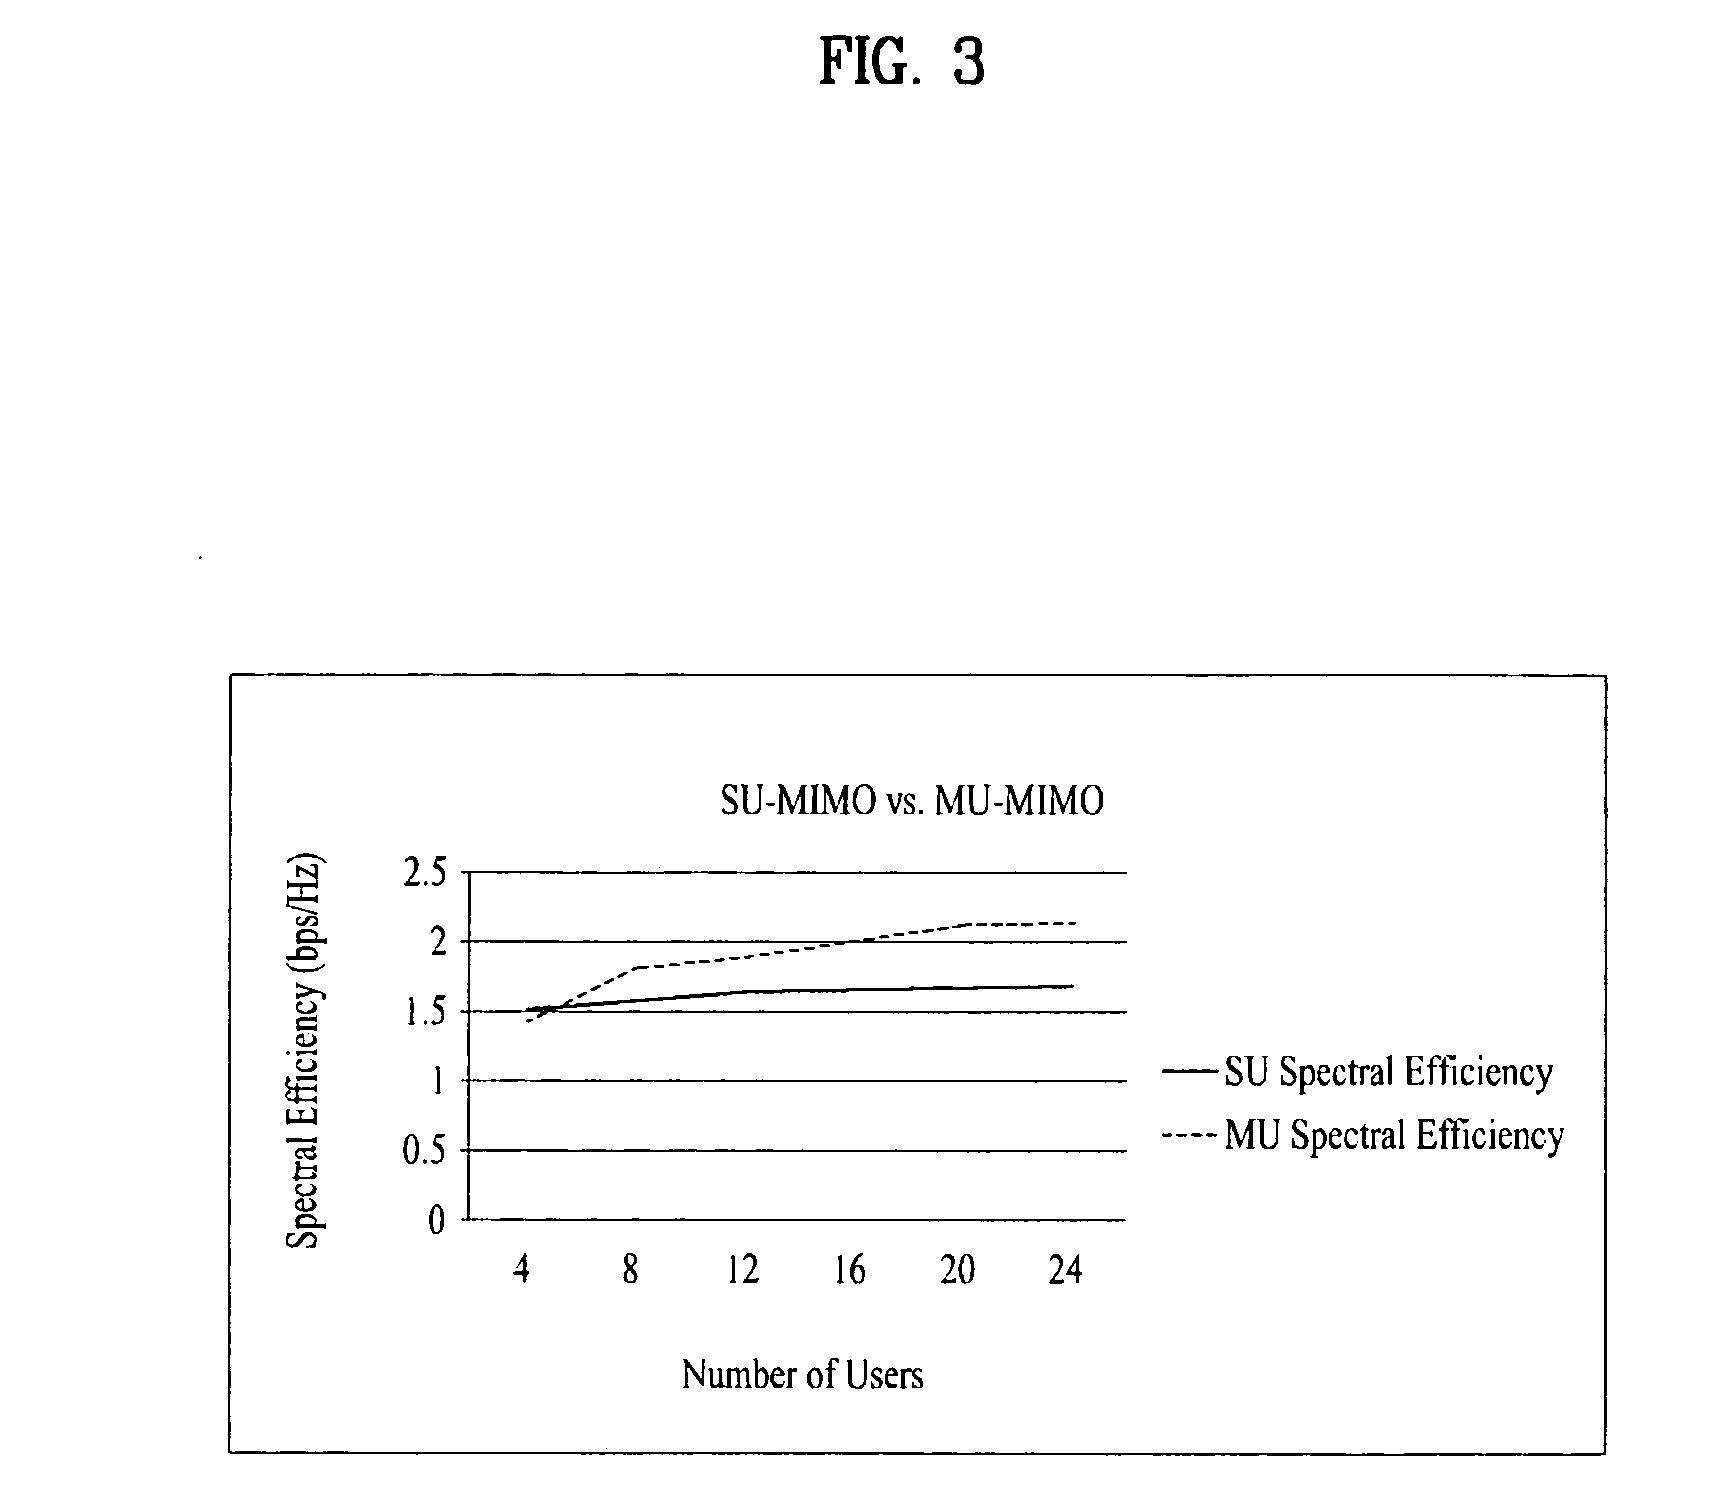 Feedback method for performing a feedback by using a codebook in MIMO system